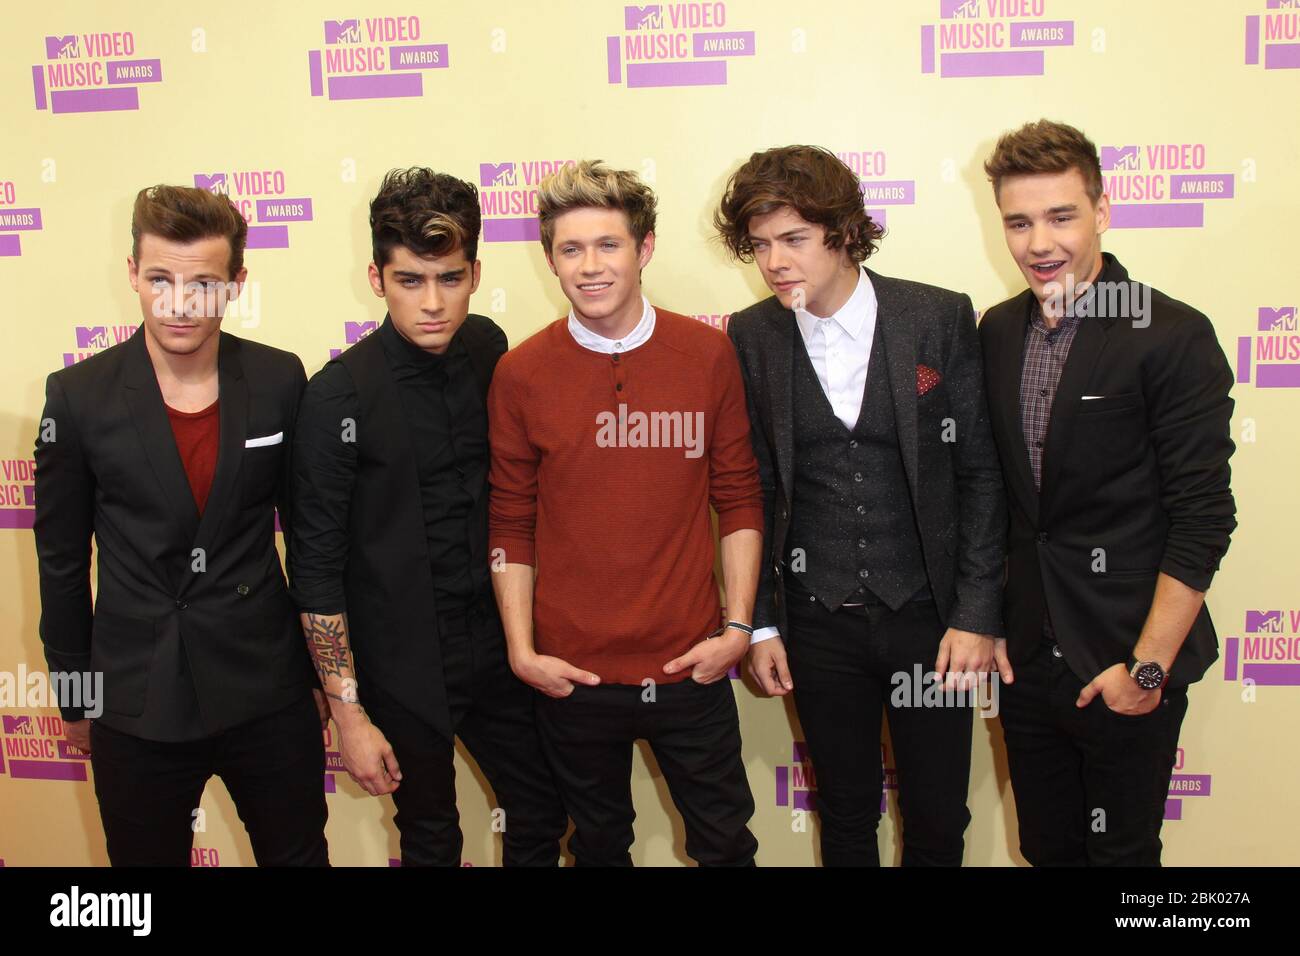 LOS ANGELES, CA - SEPTEMBER 06: One Direction arrives at the 2012 MTV Video Music Awards at Staples Center on September 6, 2012 in Los Angeles, California. People: One Direction Credit: Storms Media Group/Alamy Live News Stock Photo